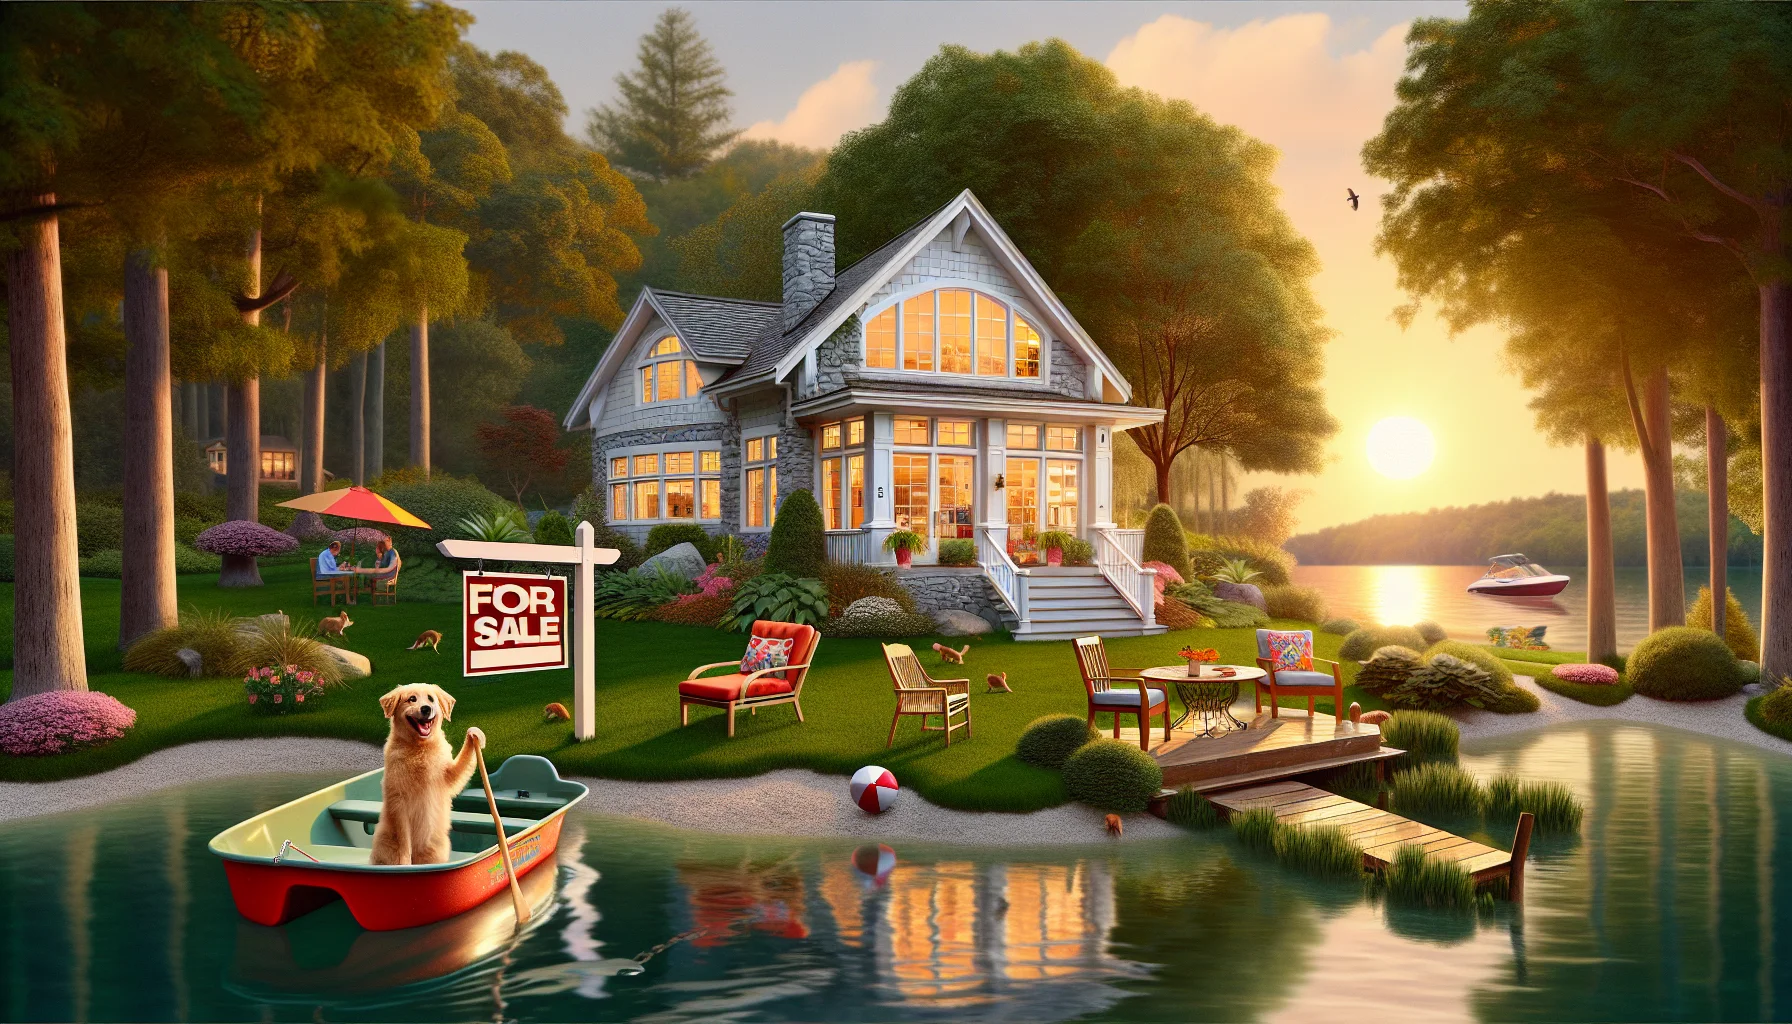 Imagine a humorous and hyper-realistic depiction of a stunning second home nested in a perfect real estate scenario. Picture this as a charming, white-stone, lakeshore cottage set among lush greenery with playful squirrels and chirping birds. In the backdrop, there's a setting sun draping the scene with a warm, golden glow. To add a lighthearted touch, there's a 'For Sale' sign wobbling in the manicured lawn due to an overly-enthusiastic dog wagging its tail against the sign post. The home has wide-paned windows reflecting the serene view, a cozy porch with vibrant, comfy furniture, and a fun, four-person paddle boat tethered near the private dock.